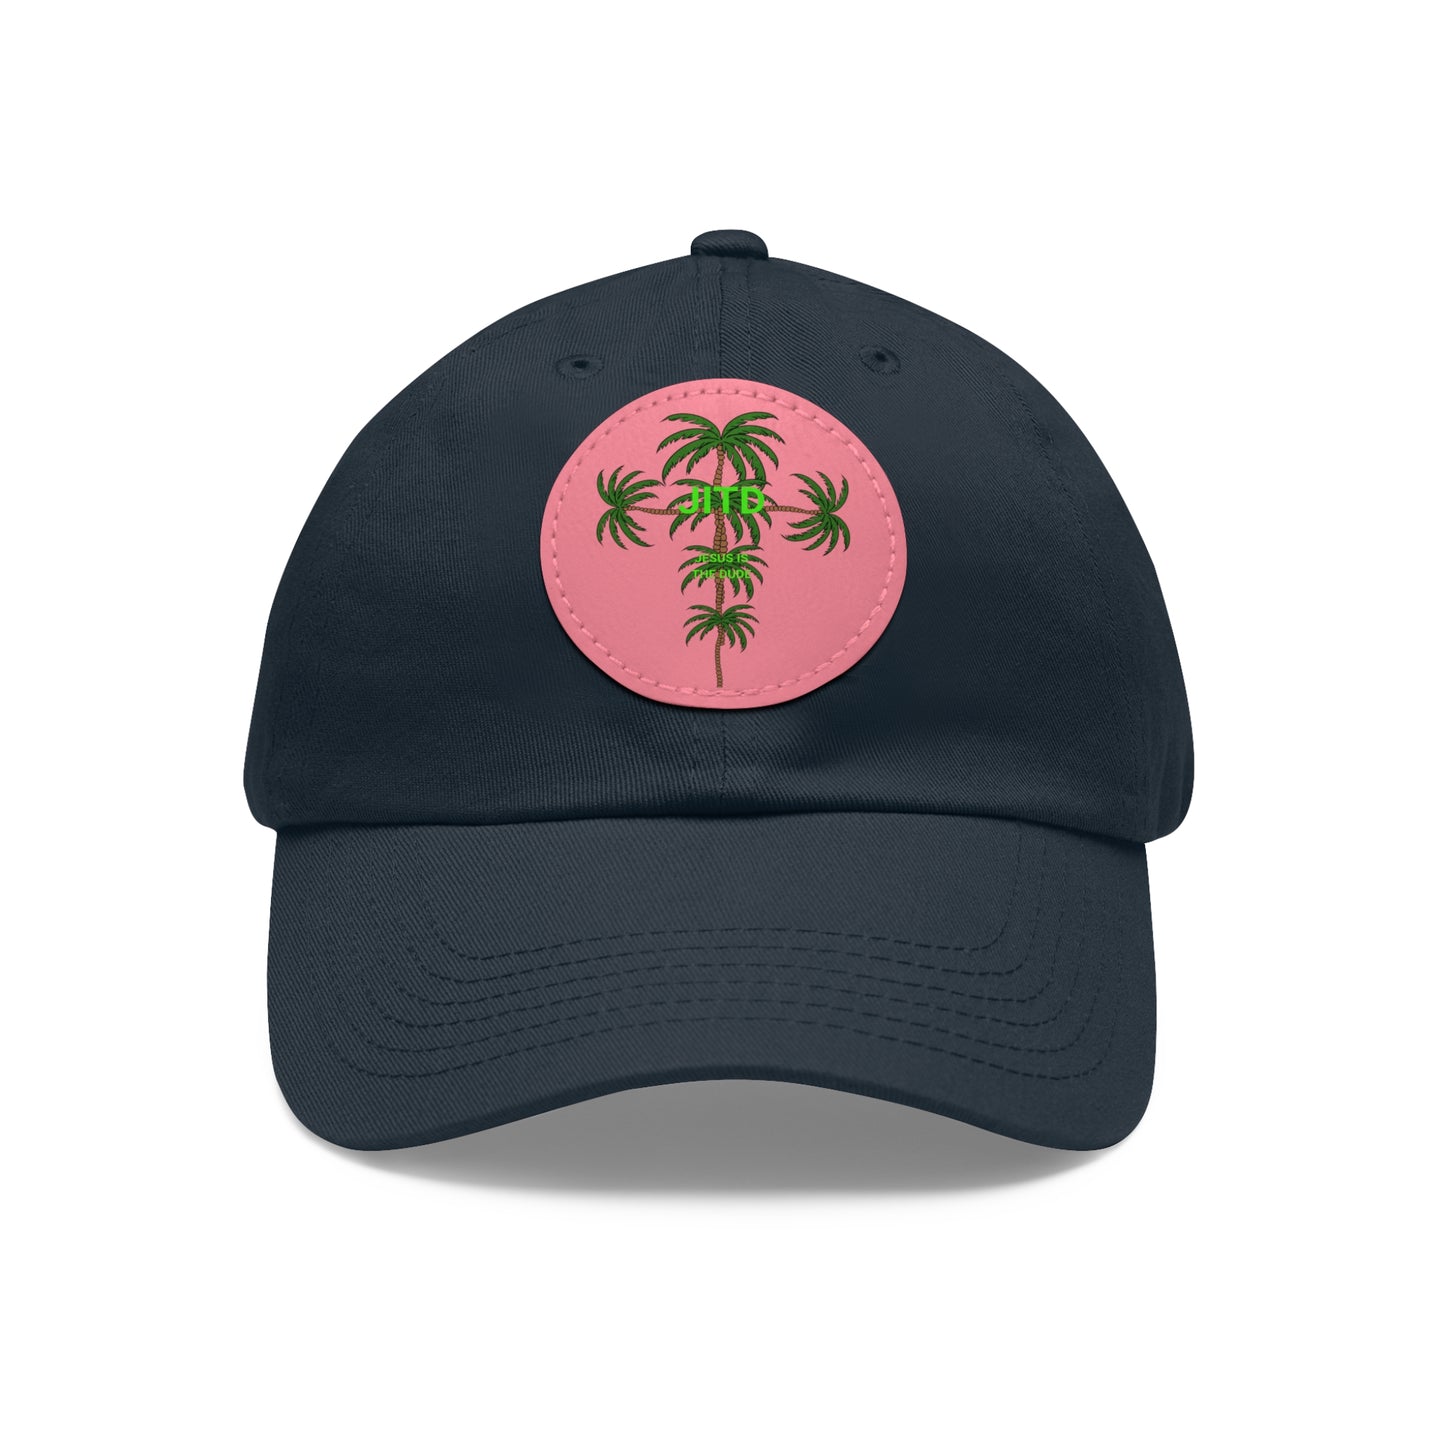 JITD HERB CROSS HAT WITH LEATHER PATCH